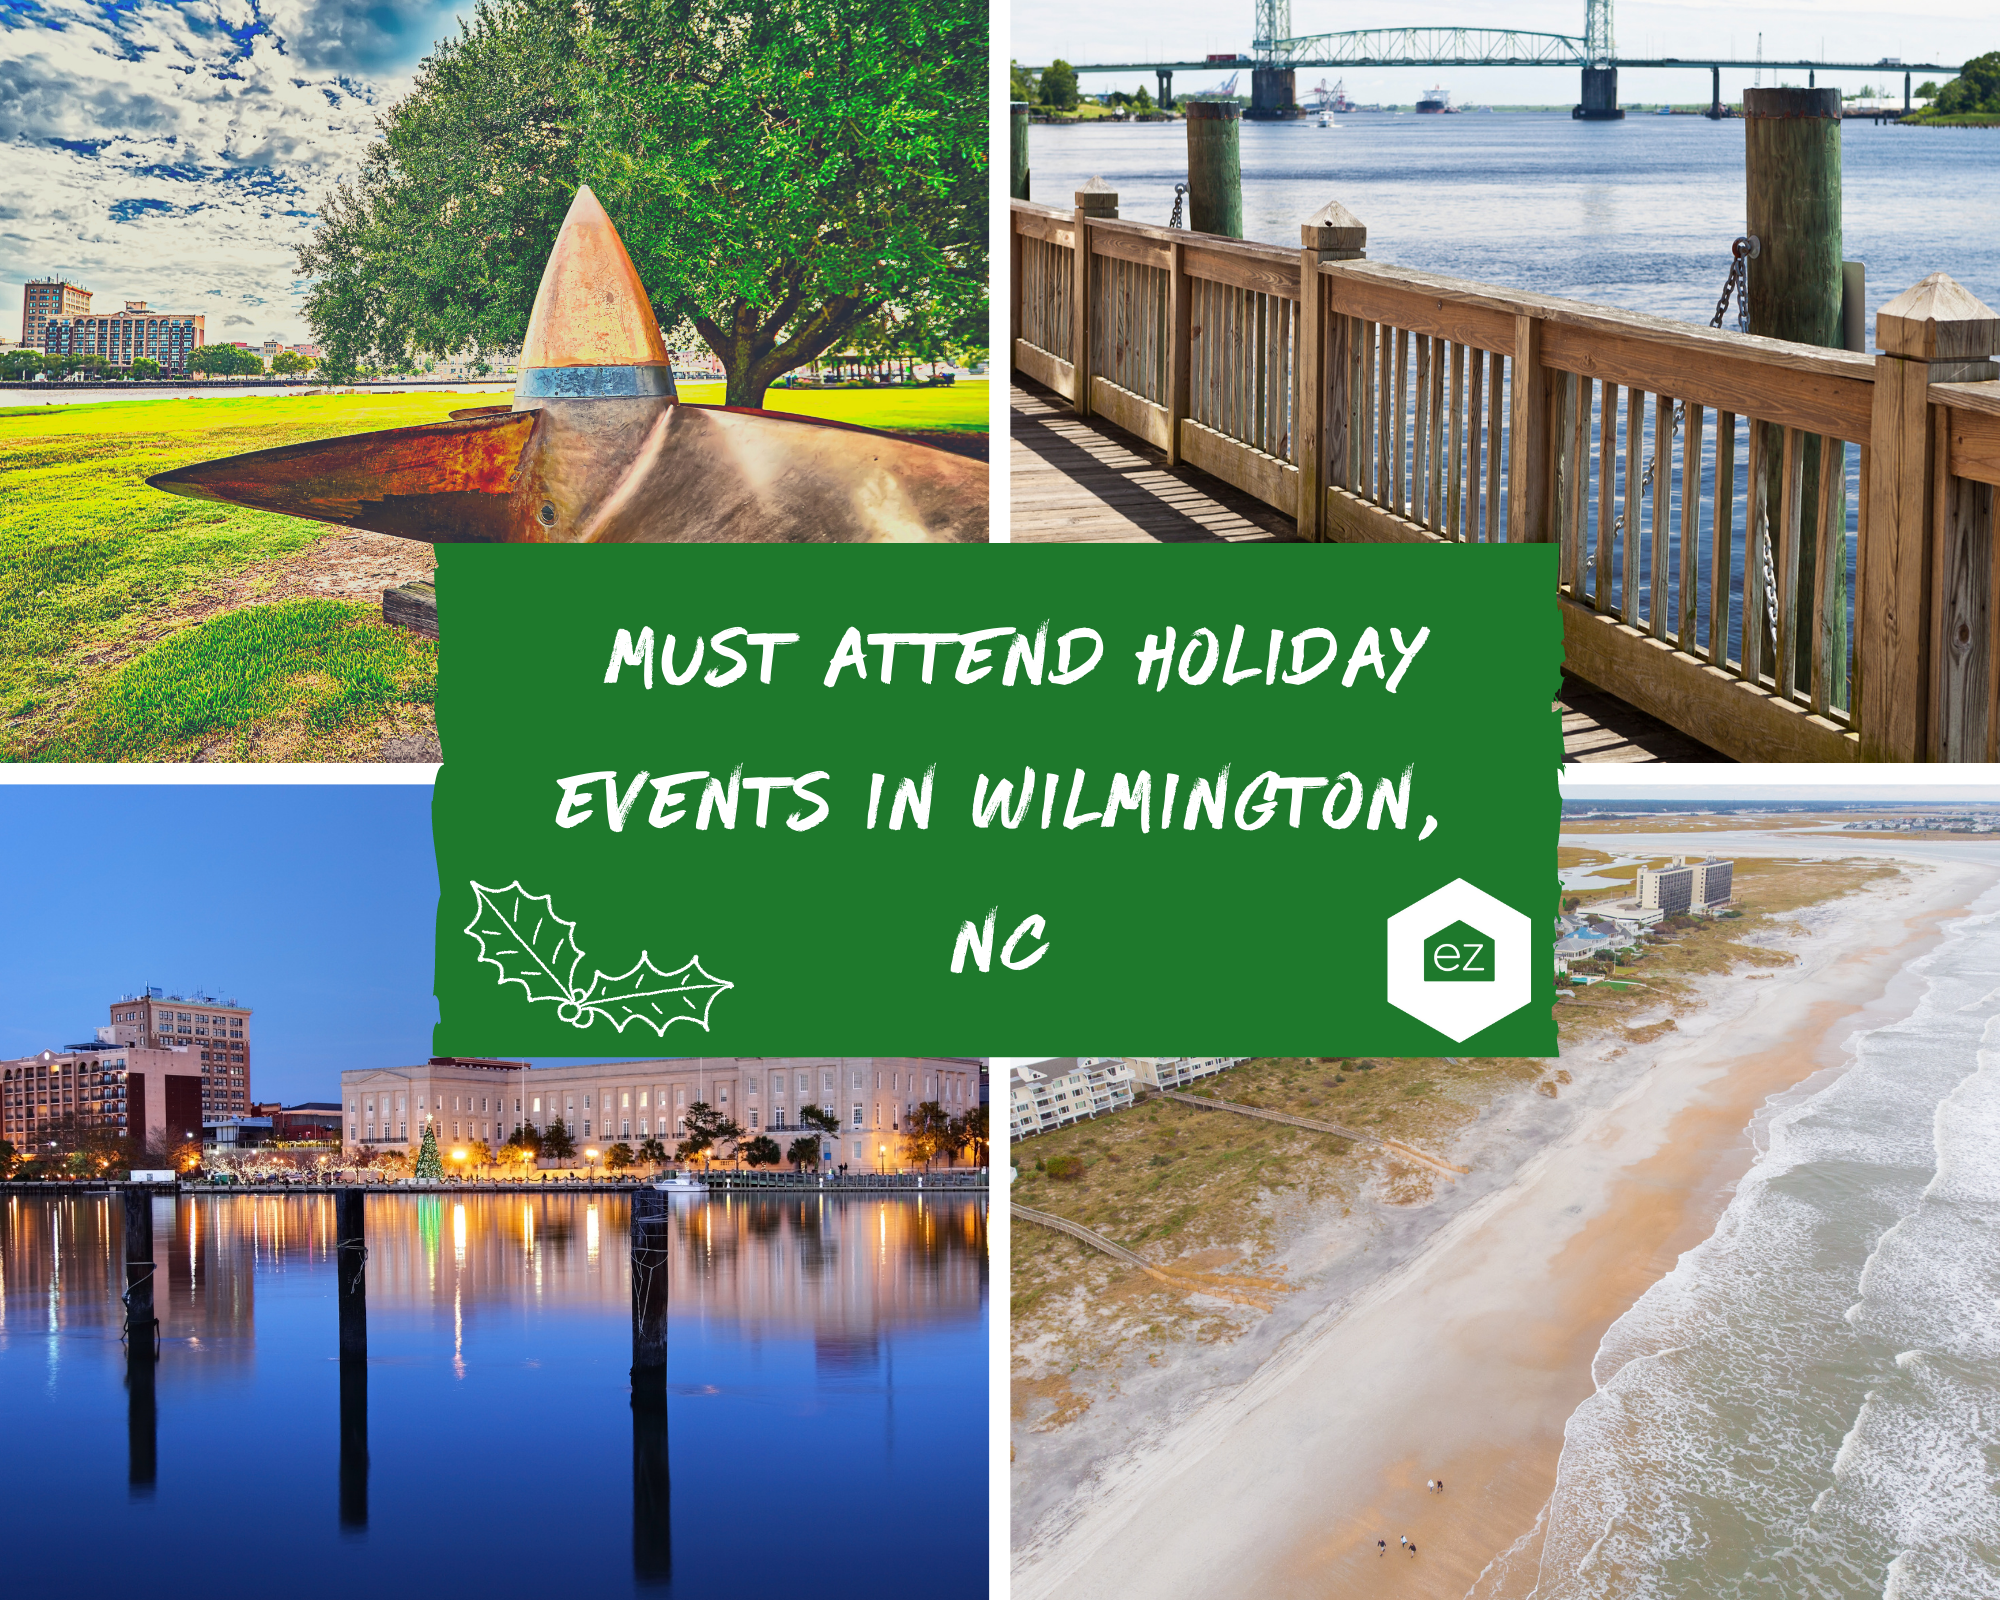 Attend Holiday Events In Wilmington Nc